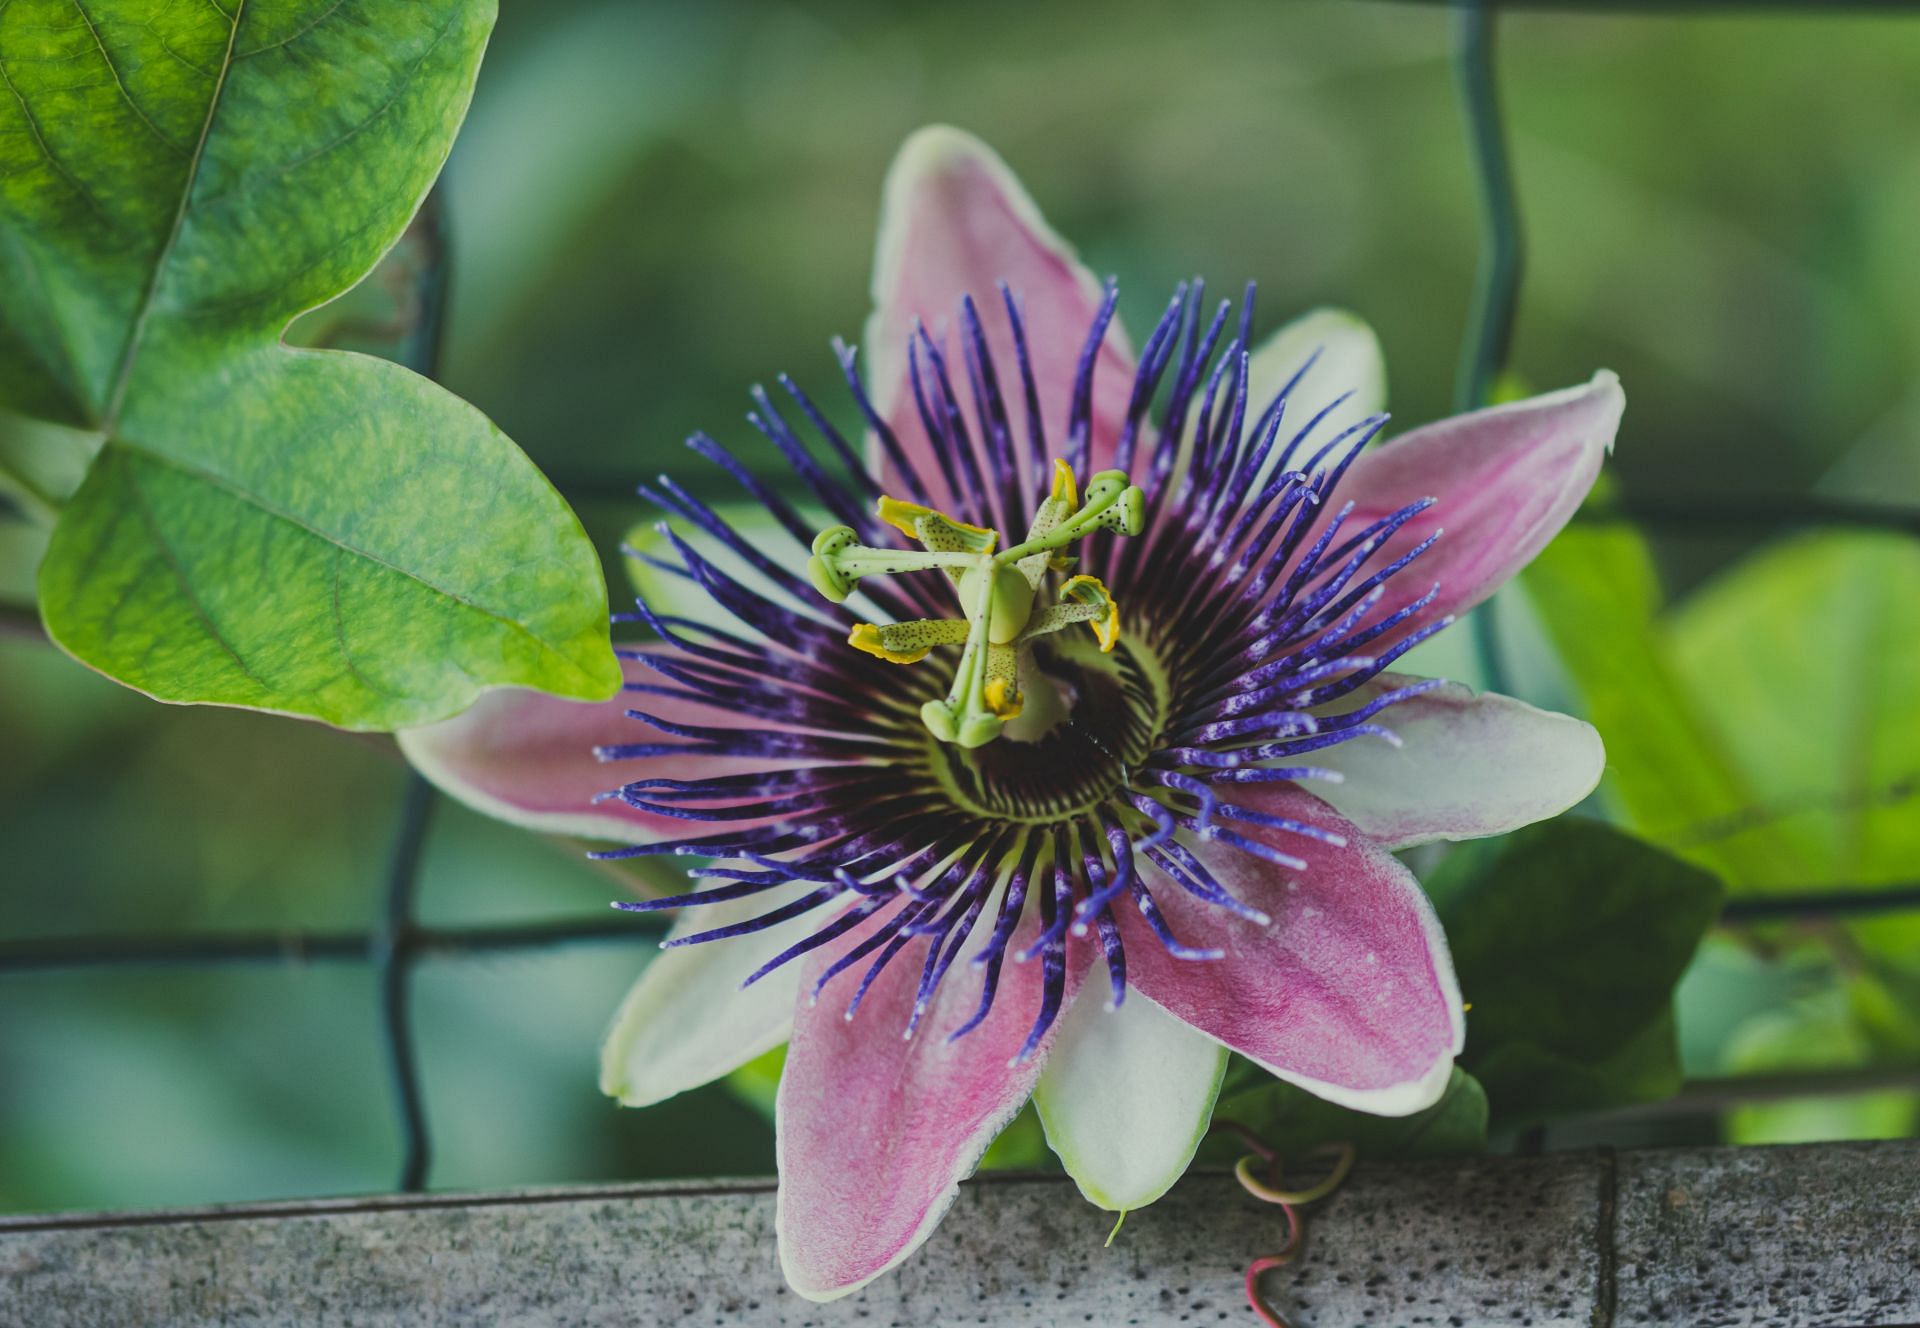 There are numerous benefits of passion flower. (Image via Pexels/ Ylanite Koppens)